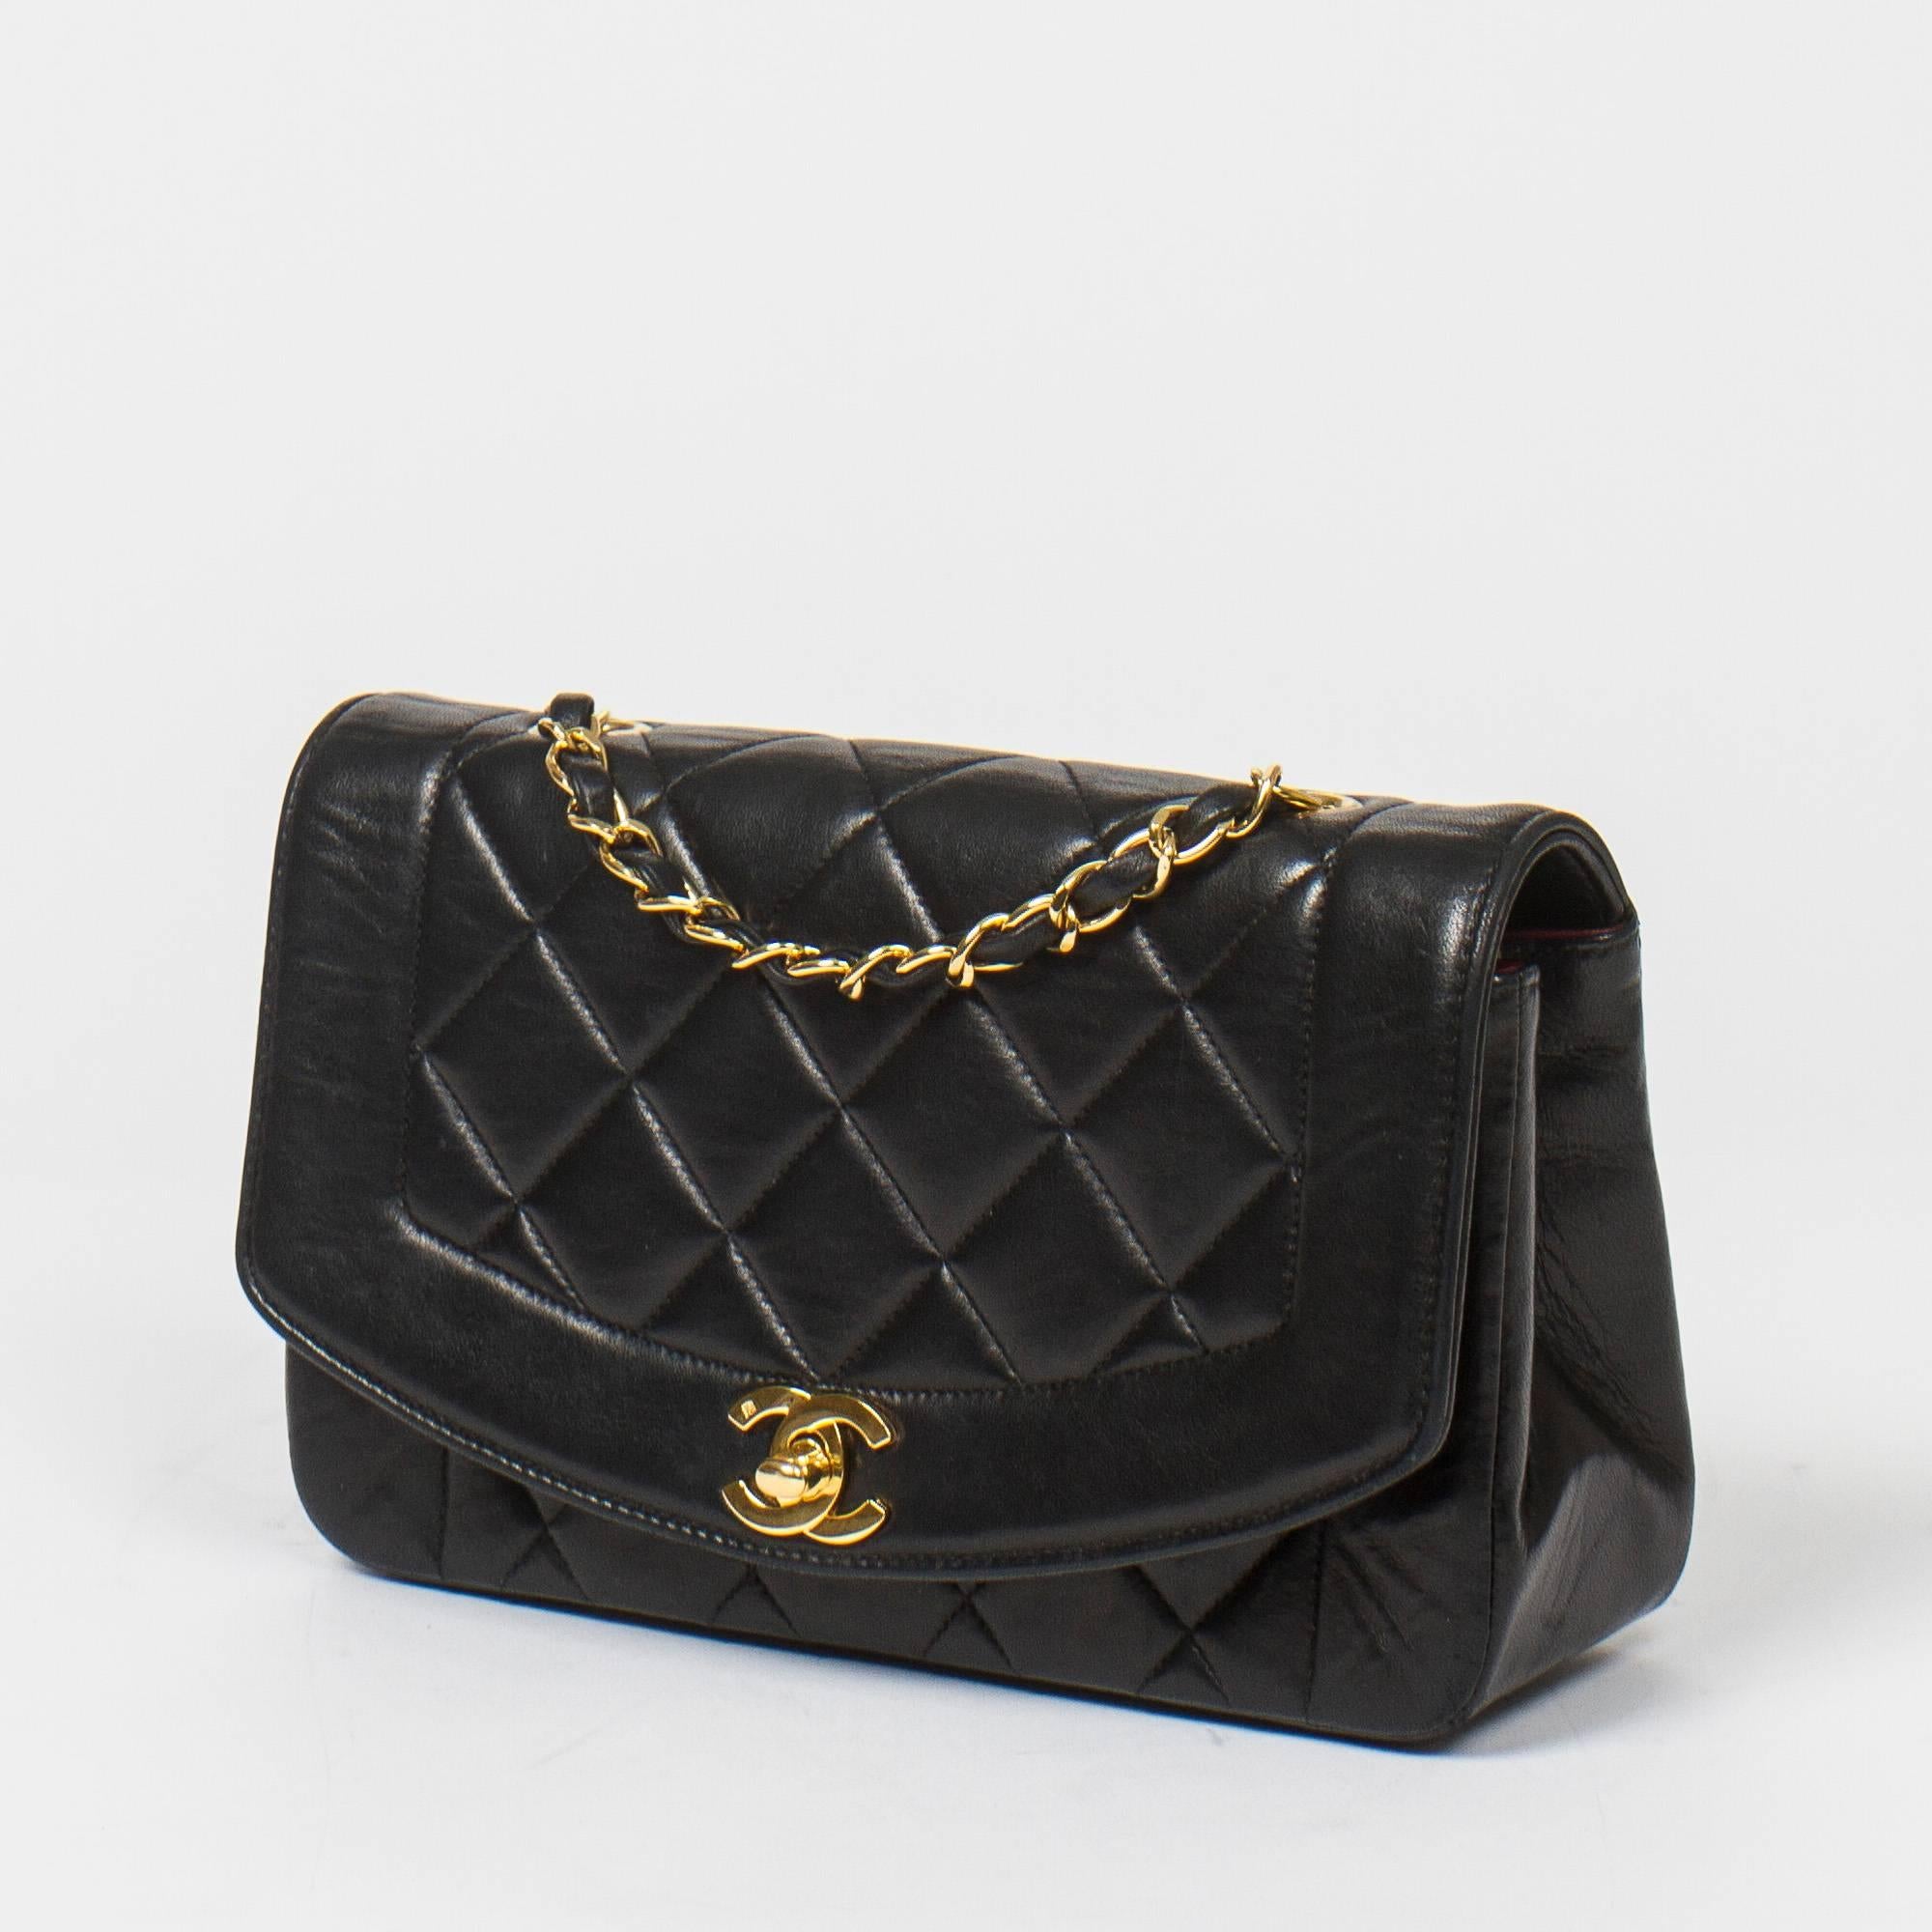 Vintage Mademoiselle Flap Bag in black quilted lambskin with gold tone chain strap interlaced with black leather. Gold tone CC turnlock. Burgundy leather interior with one slip pocket and one zip pocket. Gold tone heat stamps 